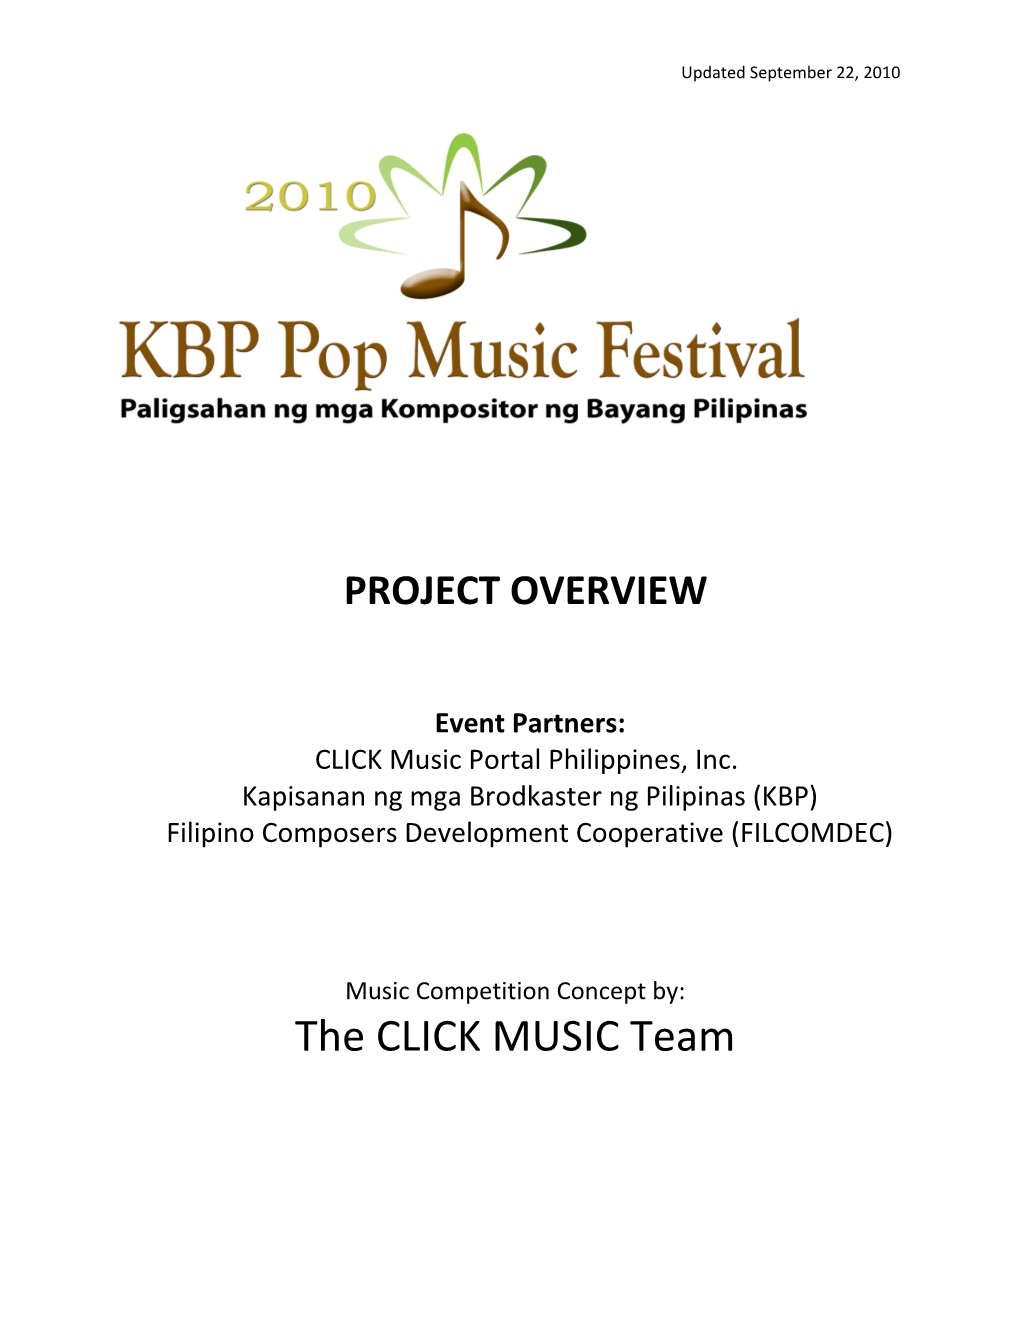 The 2010Kbppop Music Festival Is a Songwriting Competition Open to All Amateur and Professional